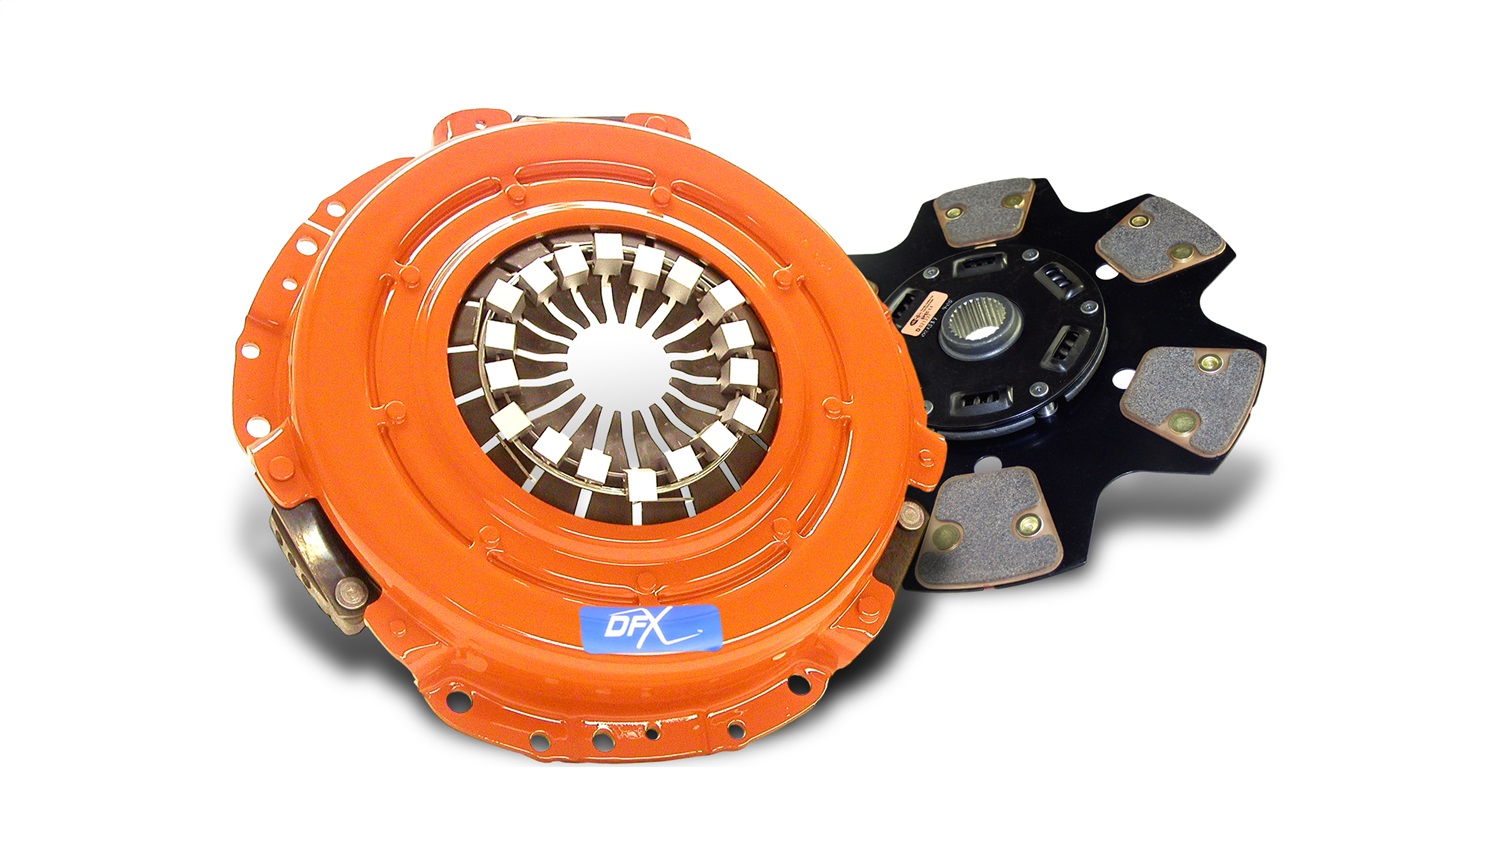 Centerforce 01148075 DFX Clutch Pressure Plate And Disc Set Fits 99-04 Mustang